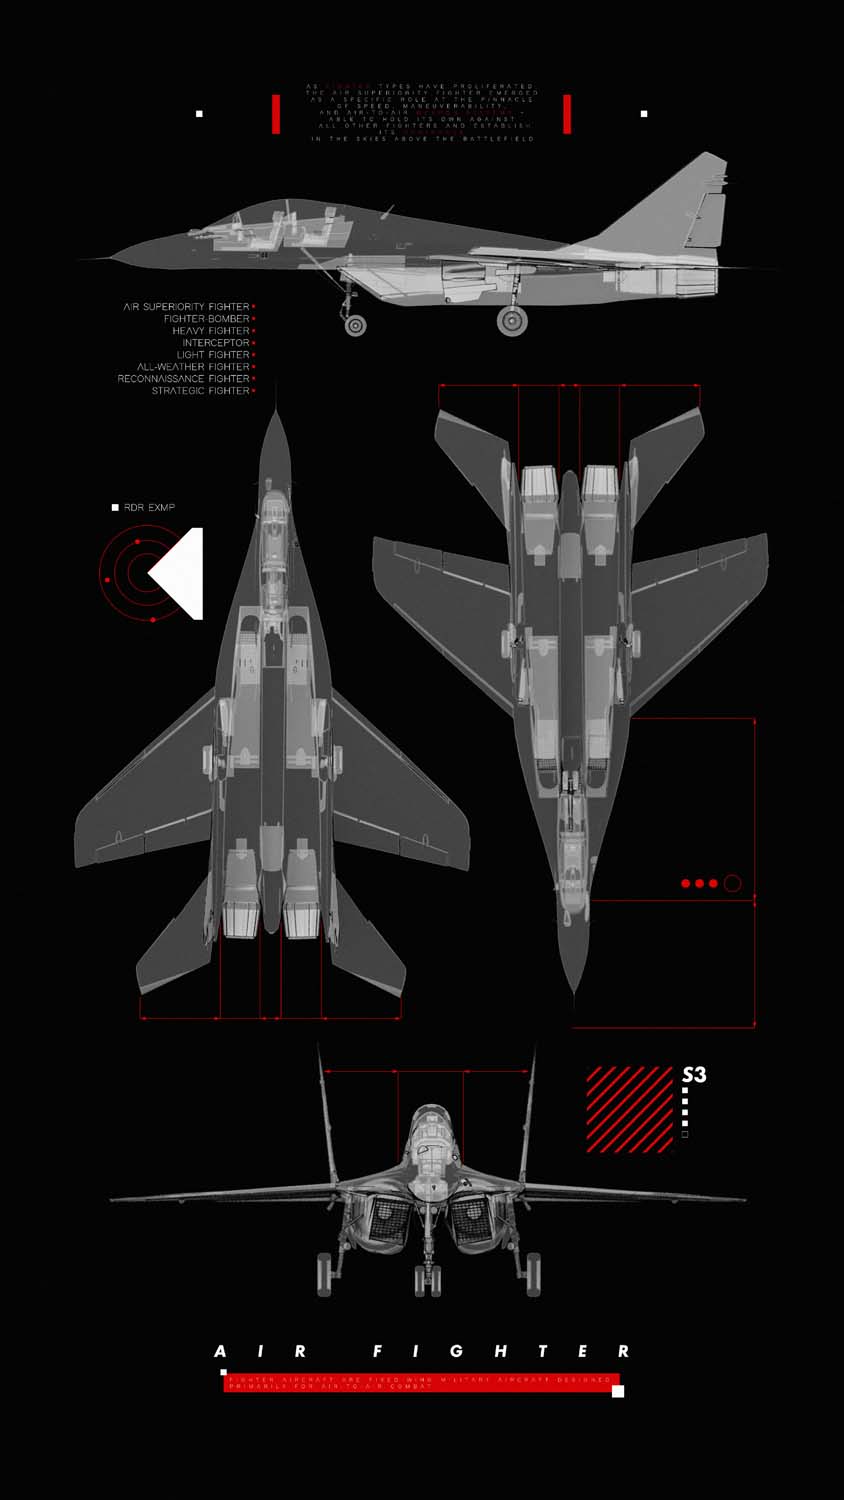 MiG Fighter IPhone Wallpaper HD - IPhone Wallpapers : iPhone Wallpapers